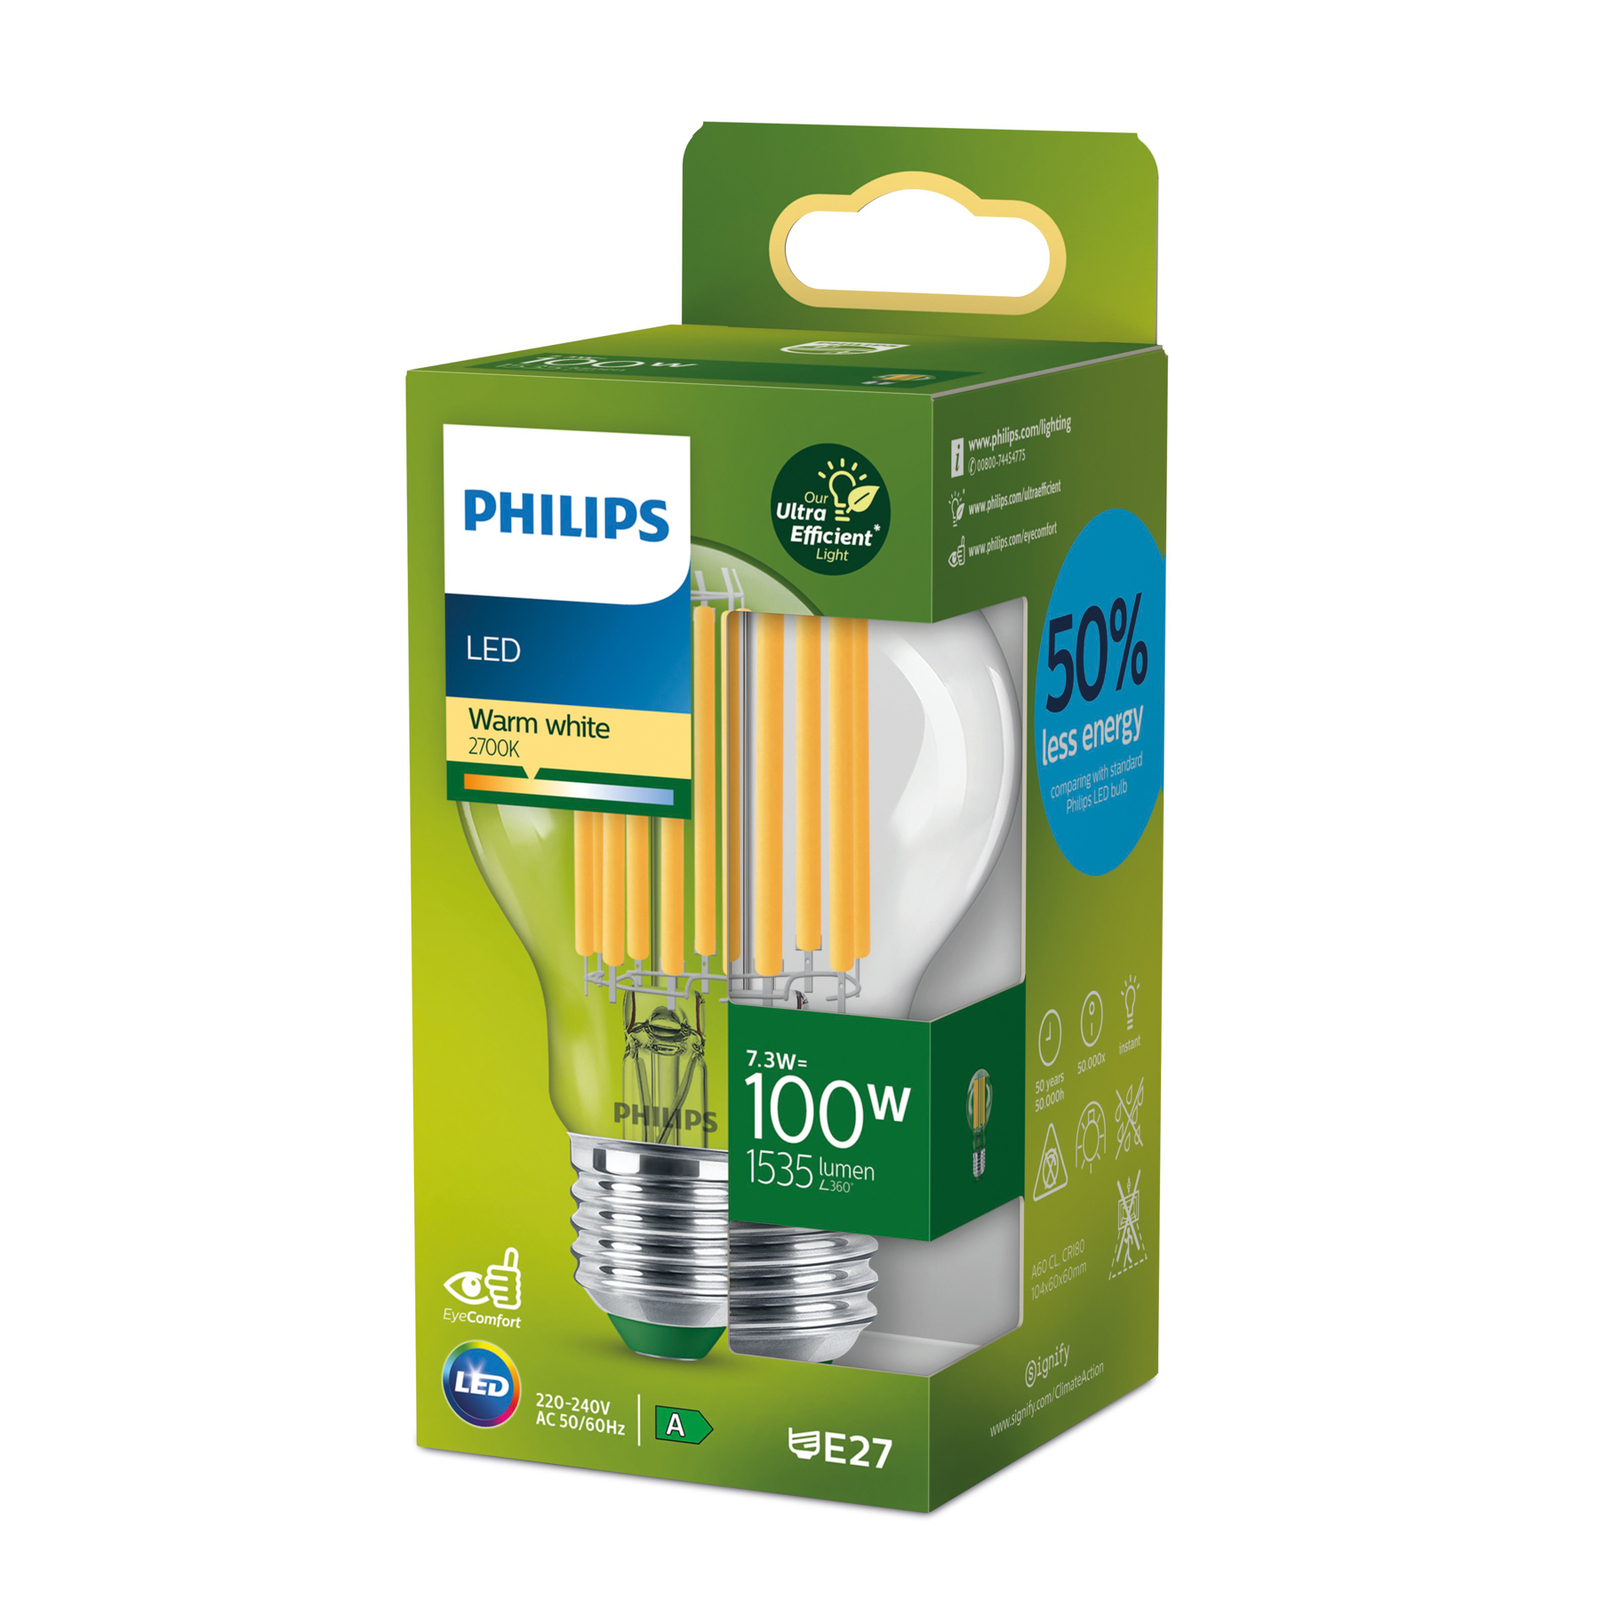 Philips E27 LED A60 7,3W 1535lm 2 700K claire